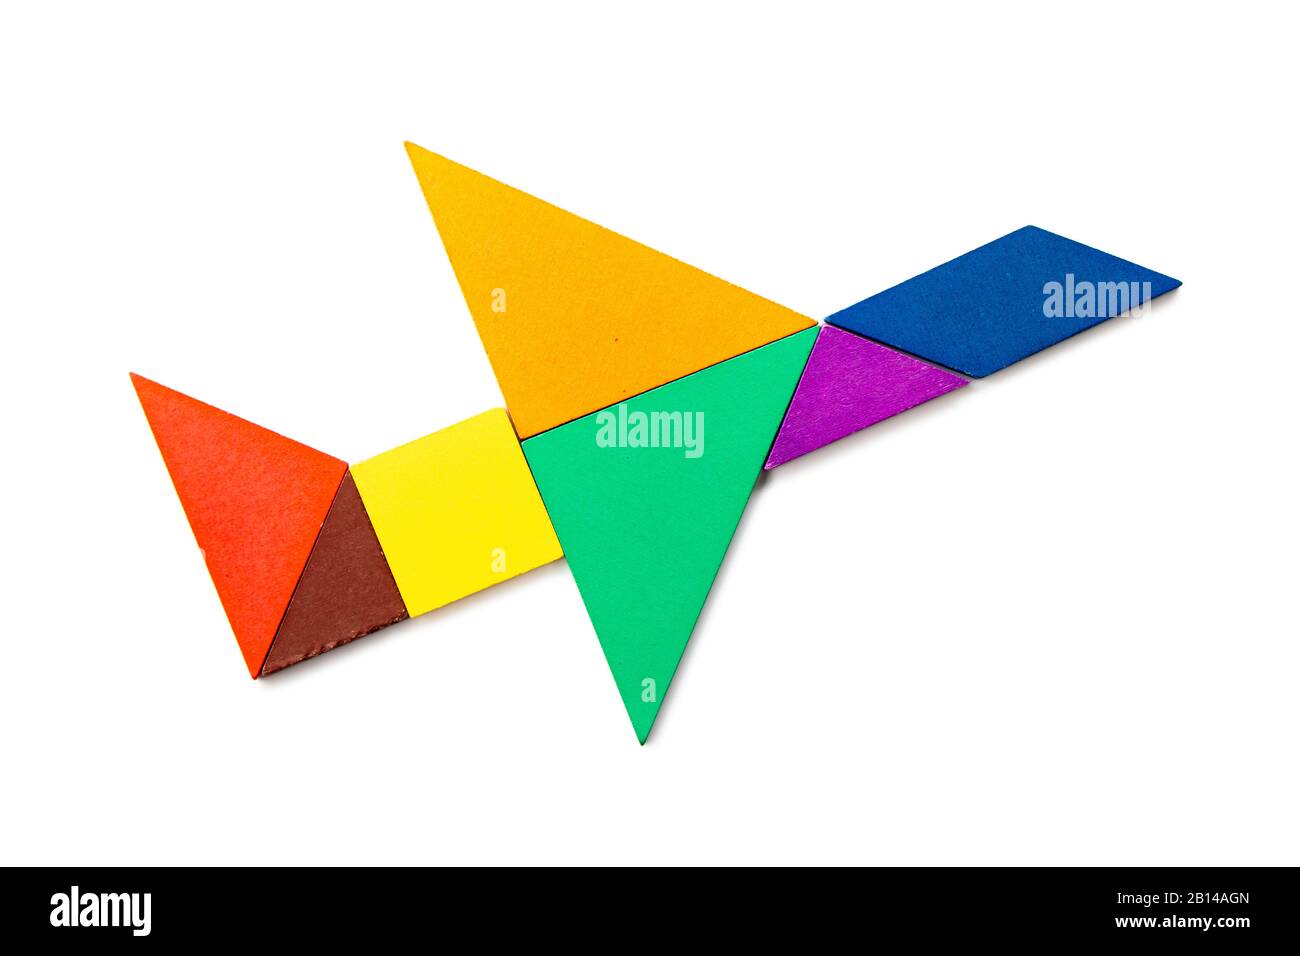 Color wood tangram puzzle in airplane shape on white background Stock Photo  - Alamy